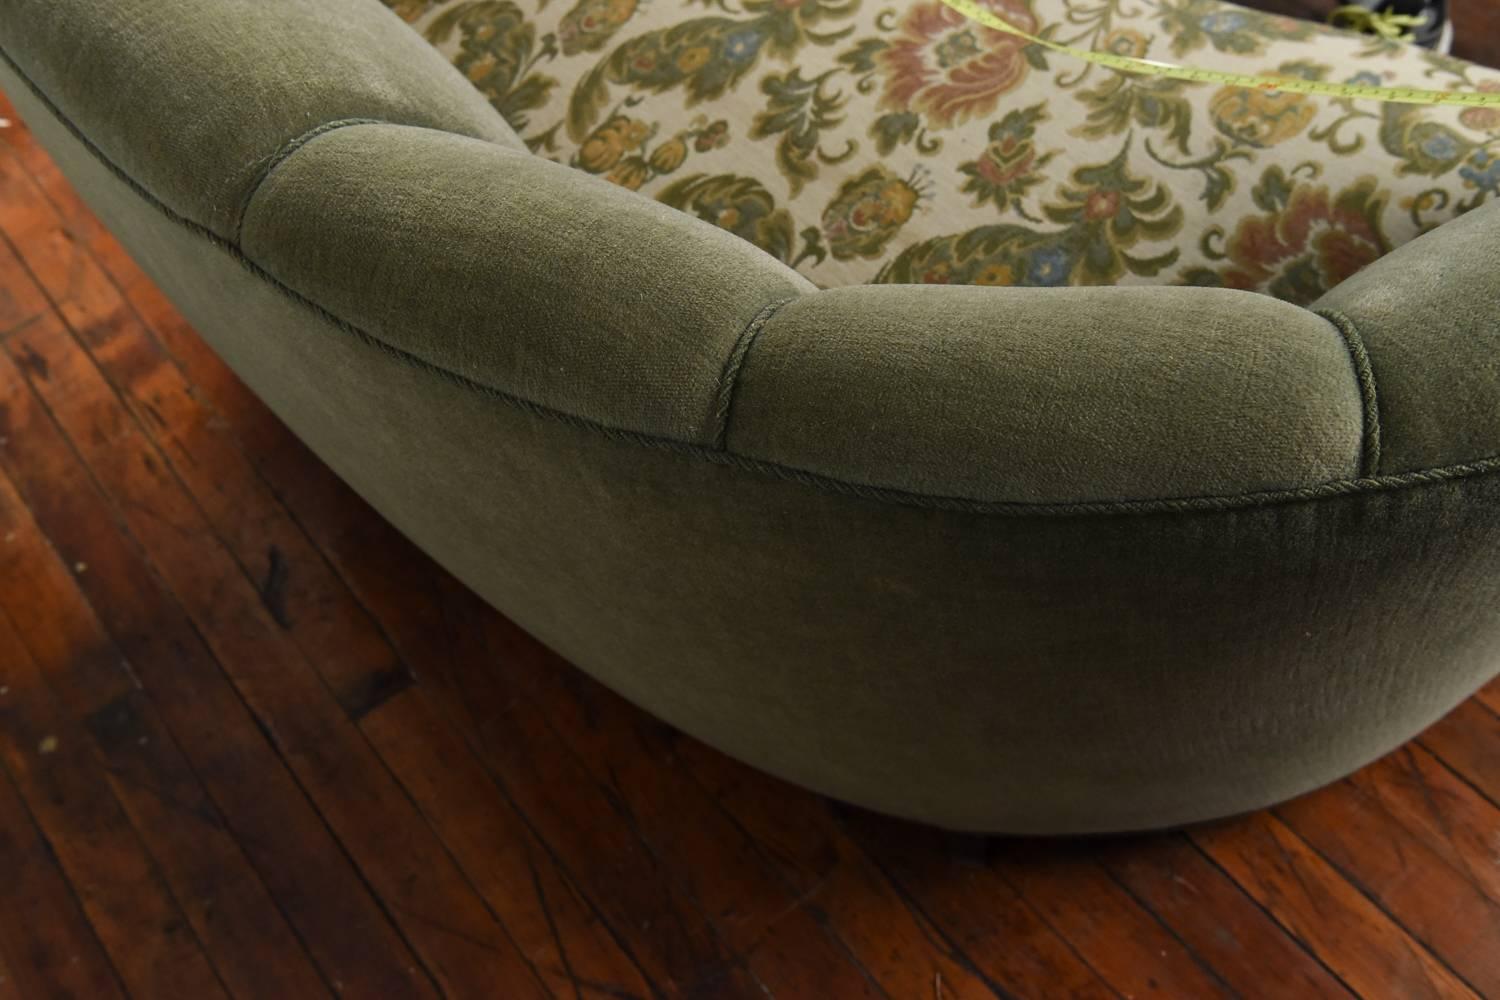 Beautiful 1940s banana form in light green mohair wool fabric with contrasting seat. The cushions are firm and the sofa sturdy. Fabric in very good condition showing very minor signs of wear. Frame and block feet made of solid beechwood. Great